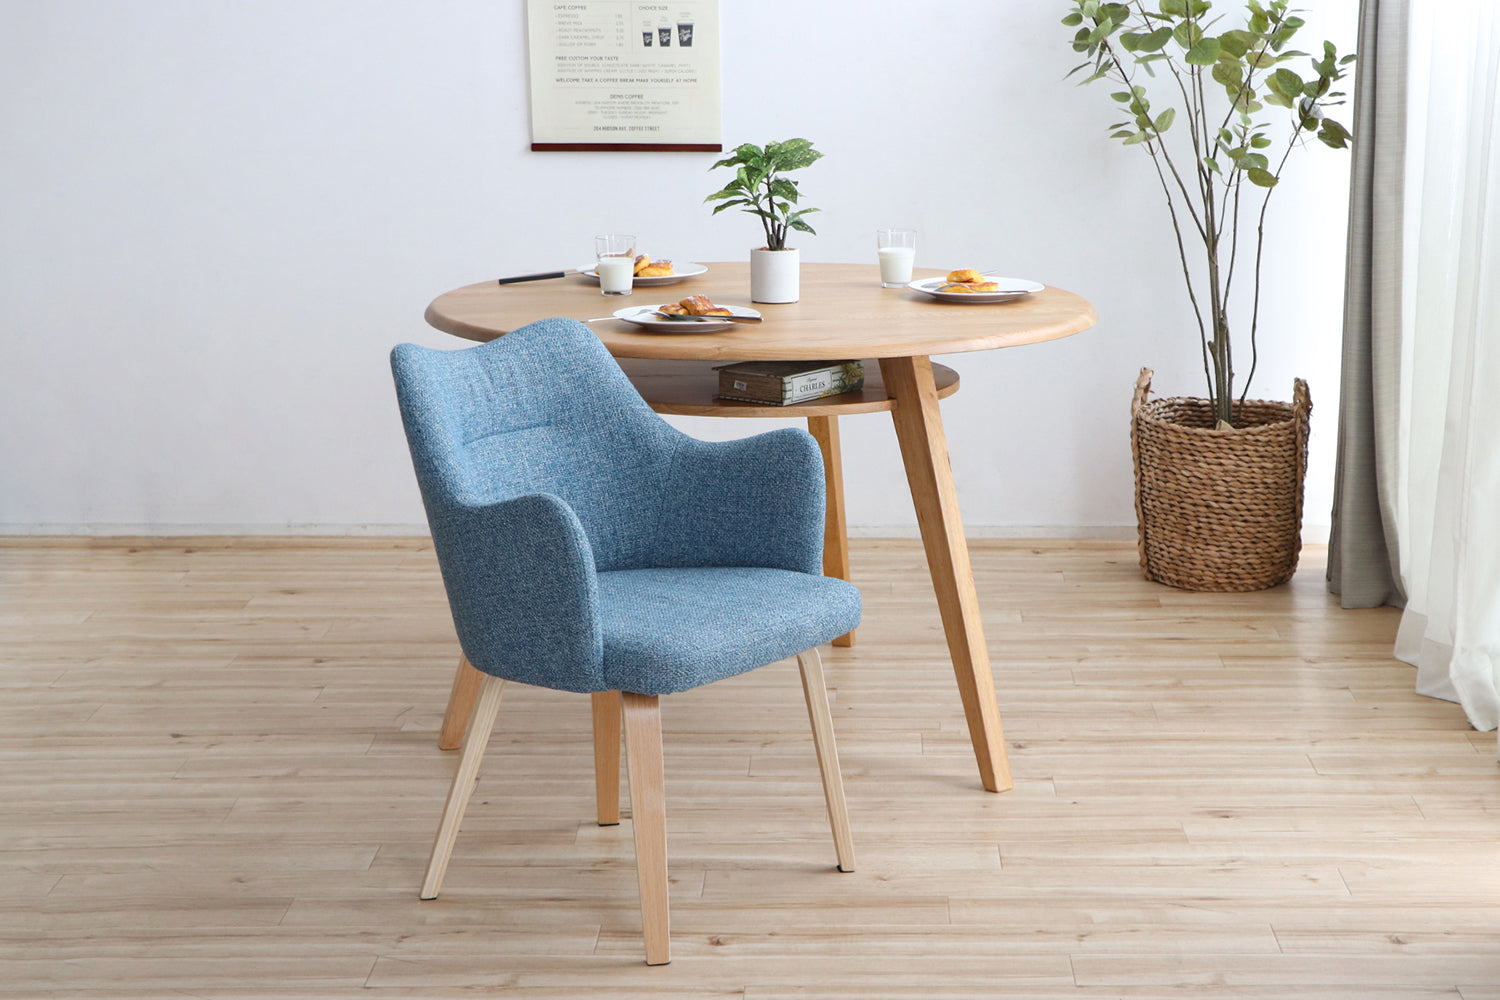 Dining Chair Noil BL